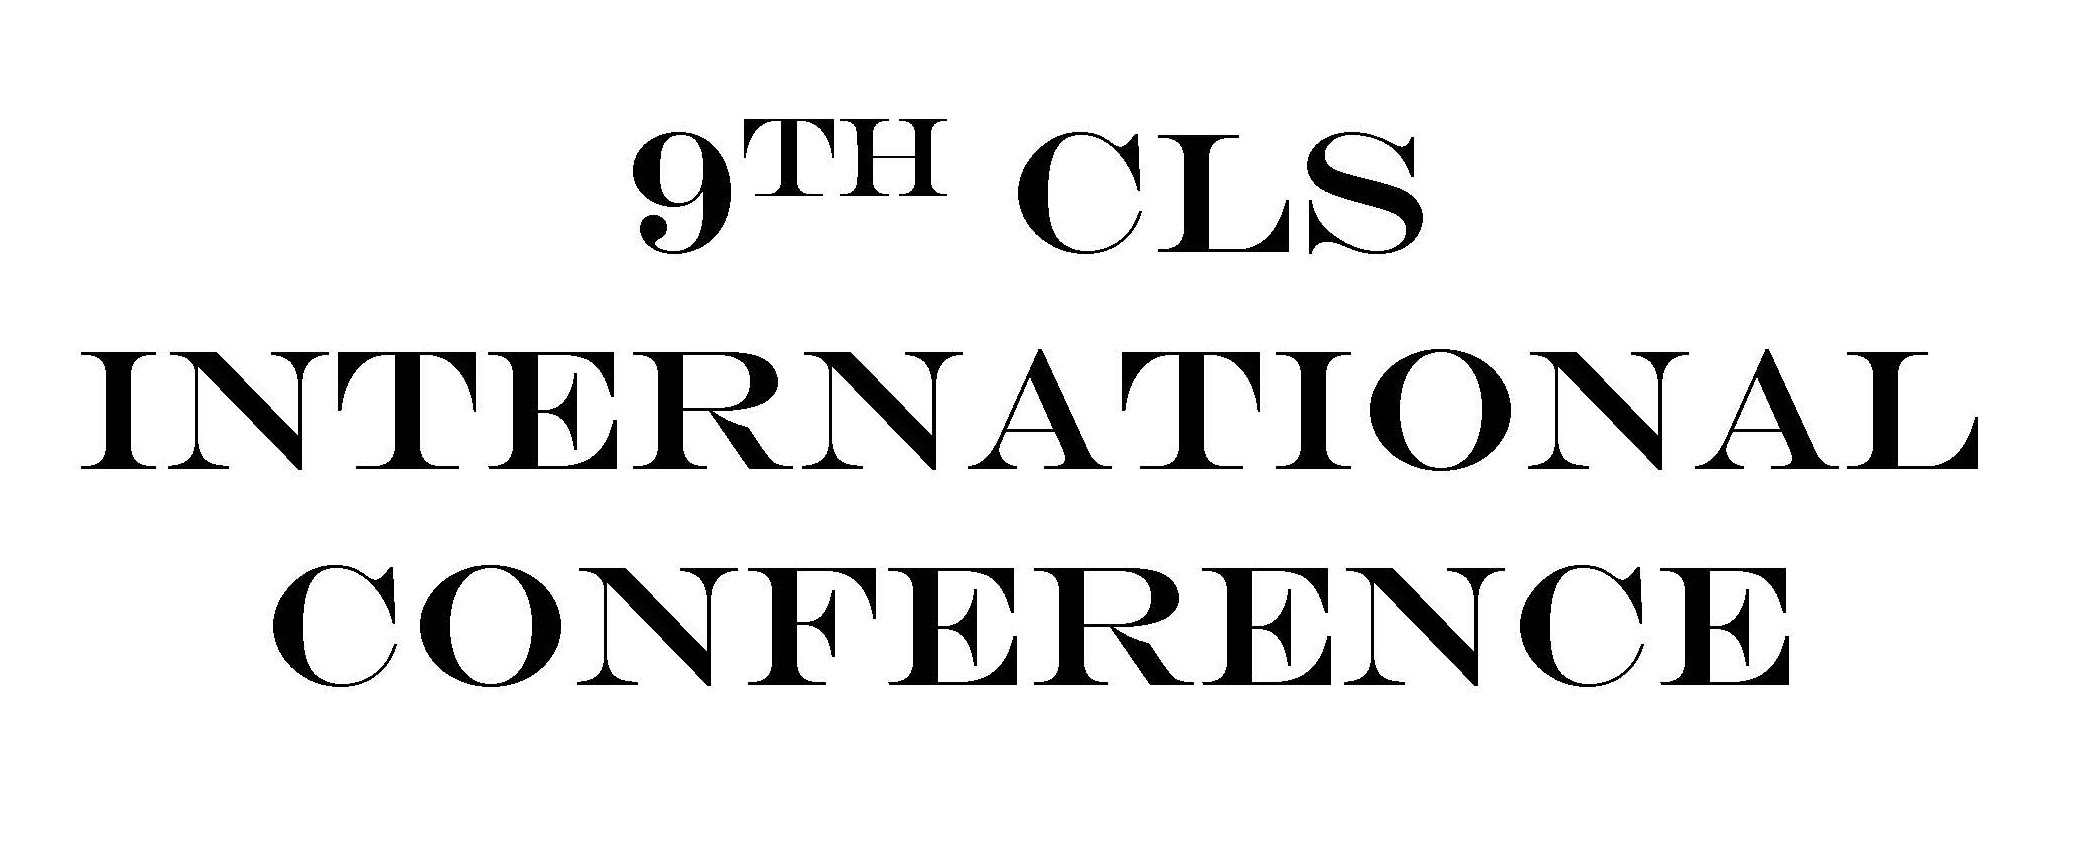 9th CLS INTERNATIONAL CONFERENCE